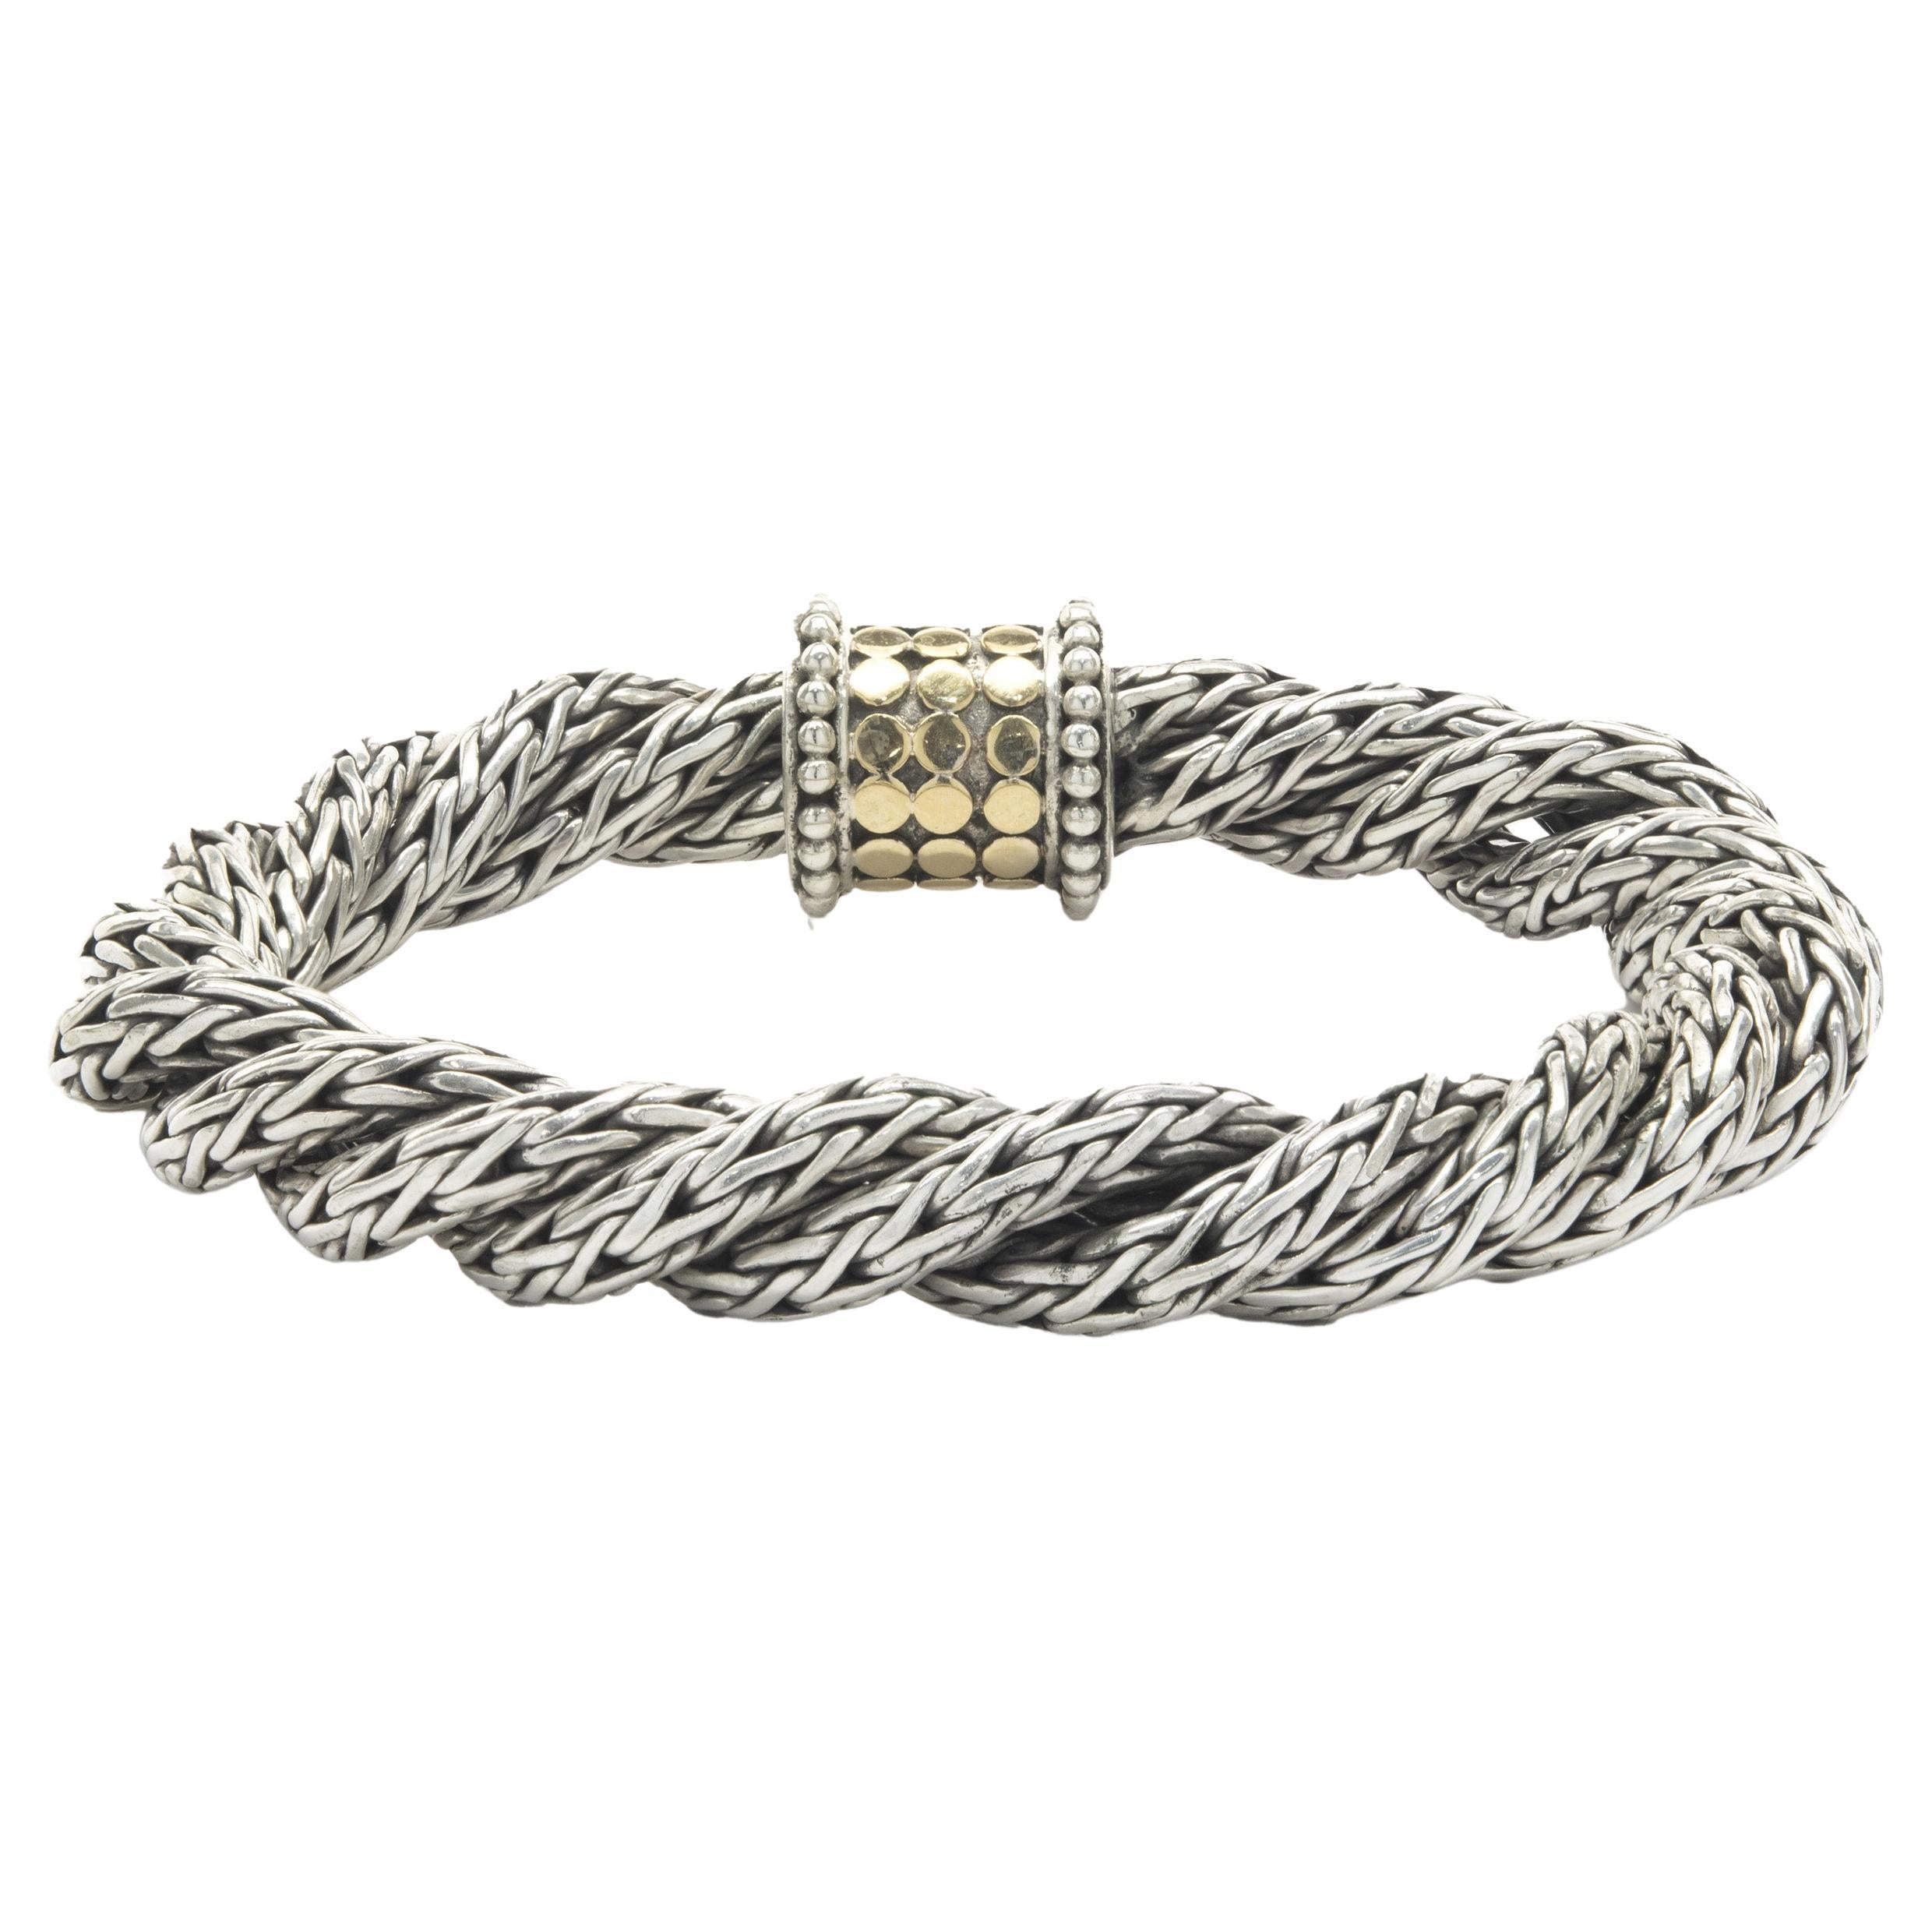 Designer: John Hardy
Material: Sterling Silver / 18K yellow gold
Dimensions: bracelet will fit up to a 7.5inch wrist
Weight: 67.95 grams